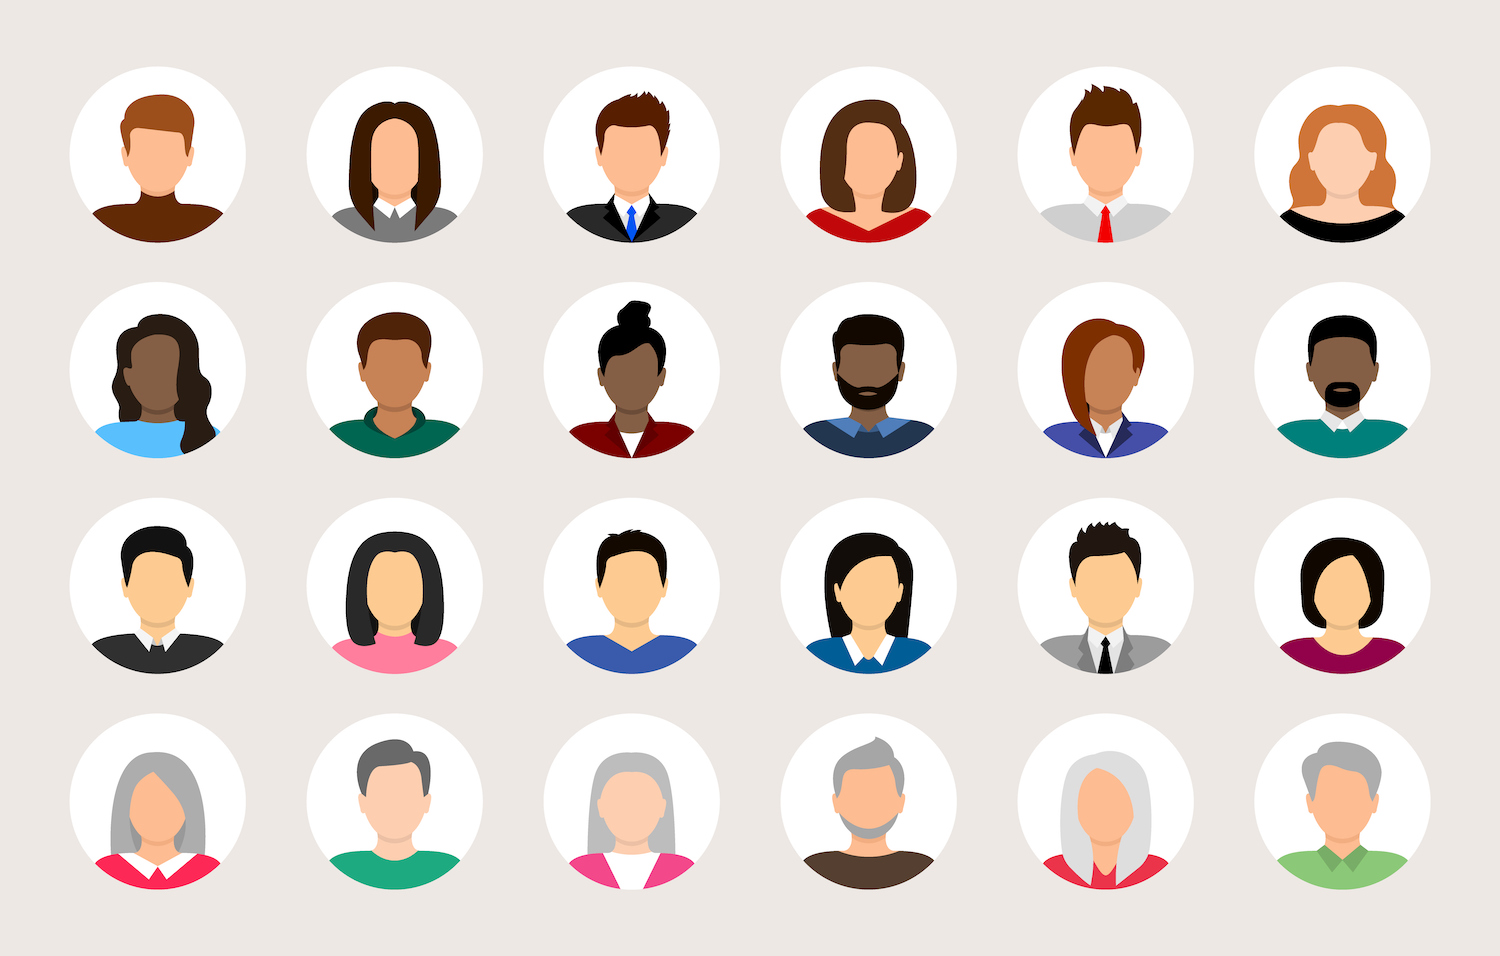 Set of people avatars.  Avatar profile icons of various people.  User avatar.  Man and woman face different nationalities.  Portraits of men and women.  Collection of characters.  Vector illustration.